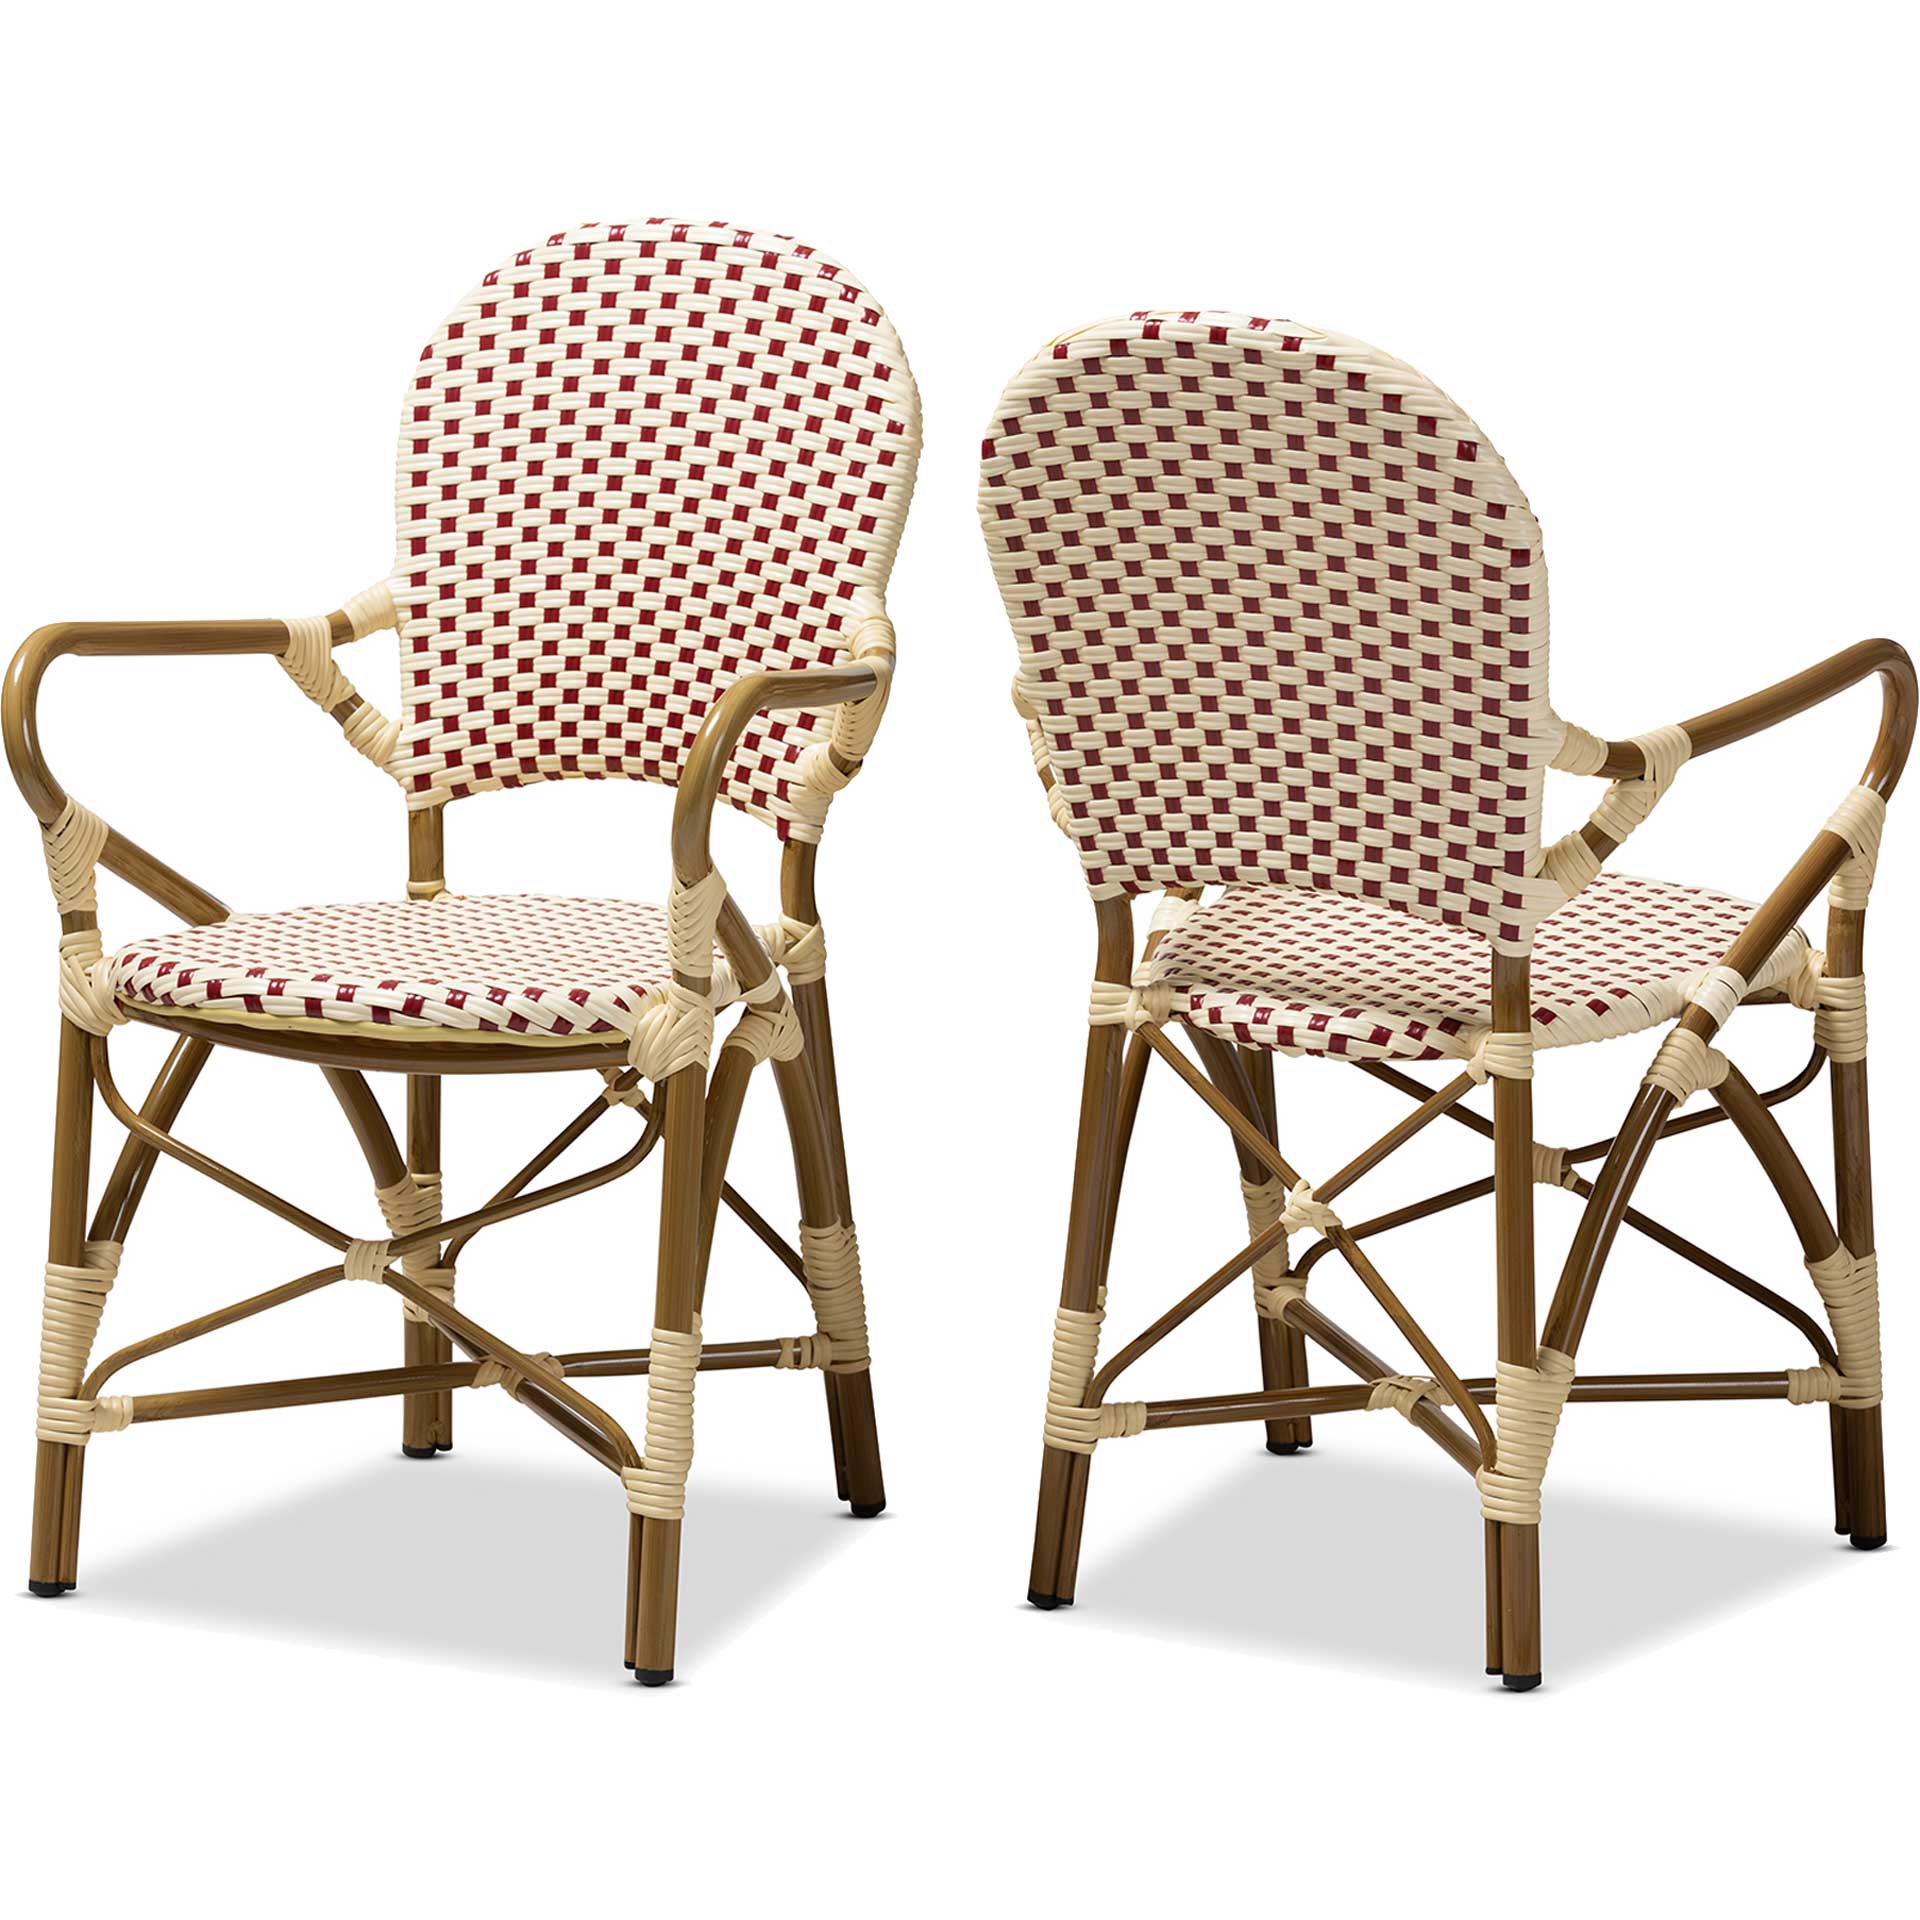 Sedra Dining Chair Beige/Red (Set of 2)